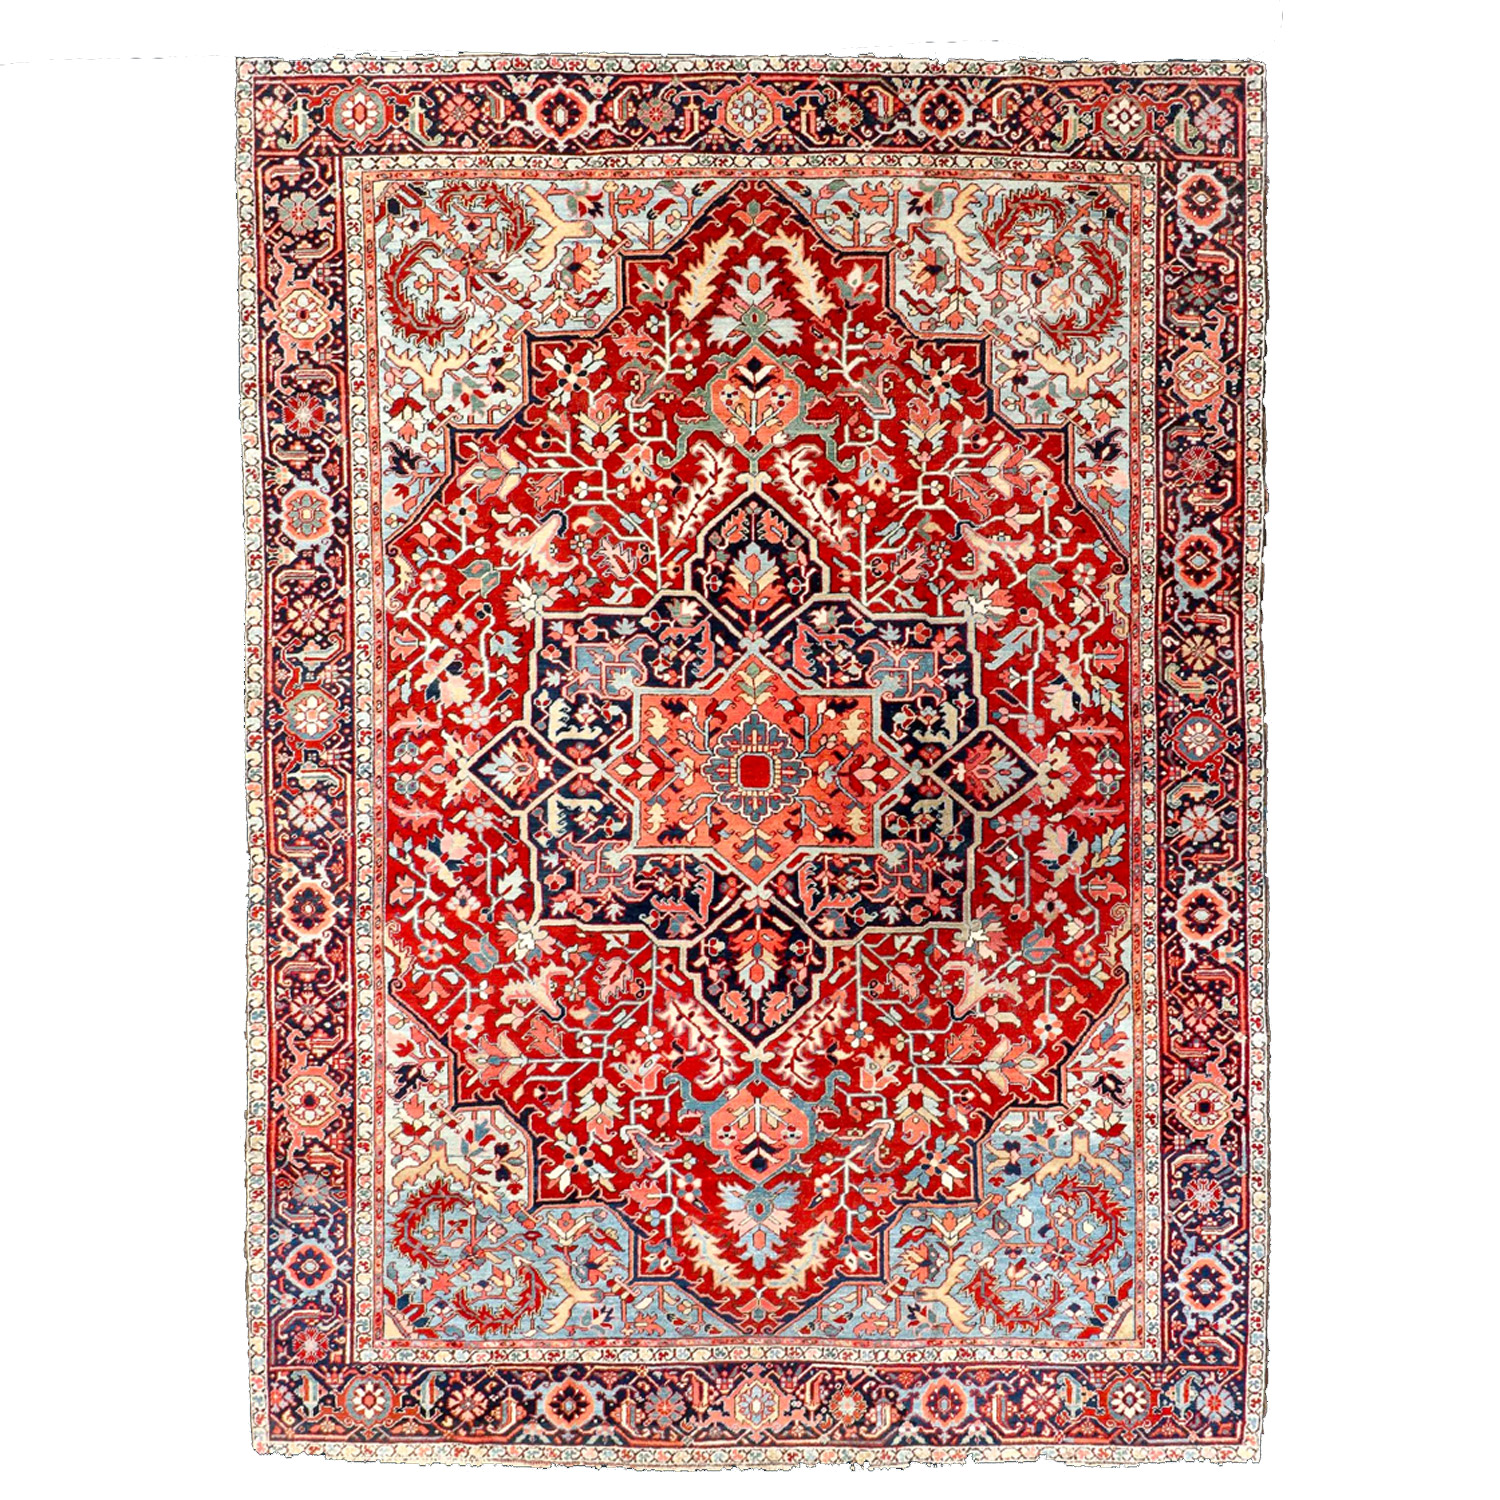 Antique Persian Heriz carpet with navy and coral medallion on a bric red field that is framed by a navy border - Douglas Stock Gallery, Oriental rugs South Natick / Wellesley Ma area